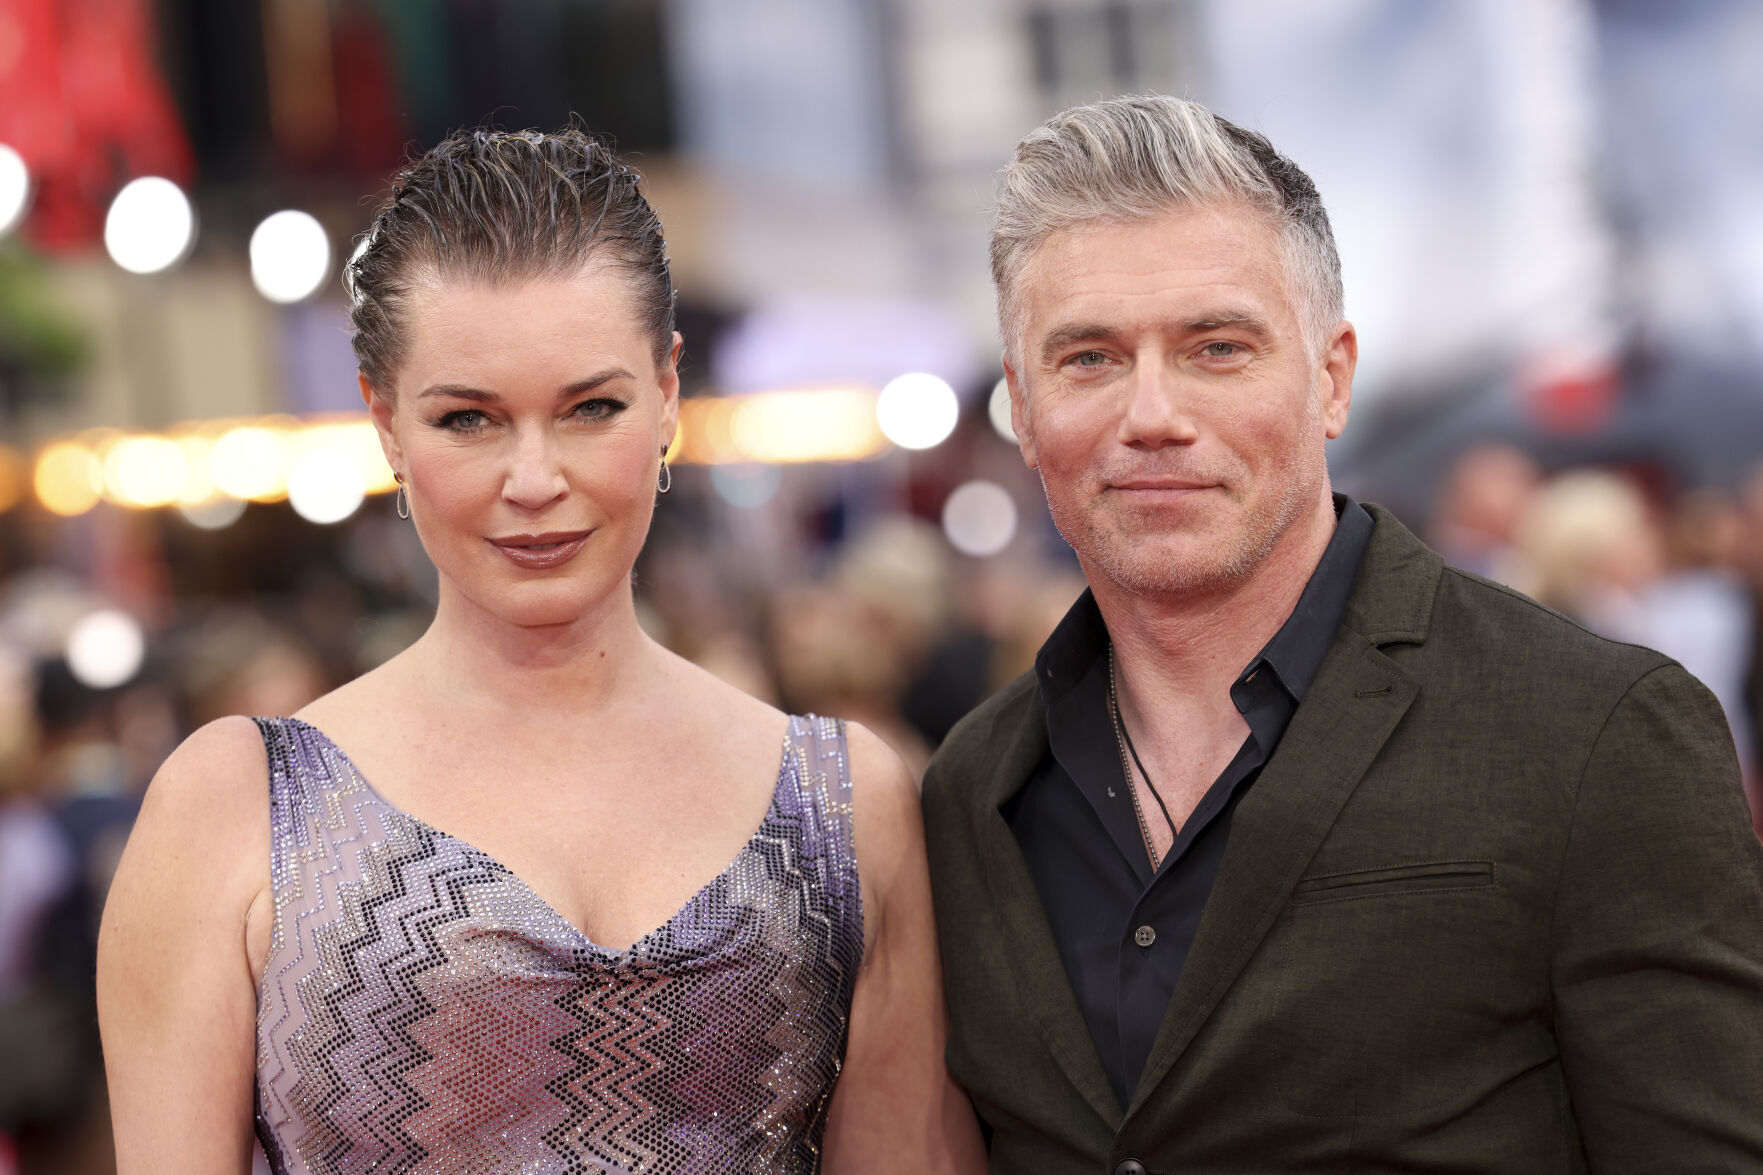 Rebecca Romijn and Anson Mount pose for photographers upon arrival at the premiere of the film 'Mission: Impossible - Dead Reckoning Part One' on Thursday, June 22, 2023 in London. 